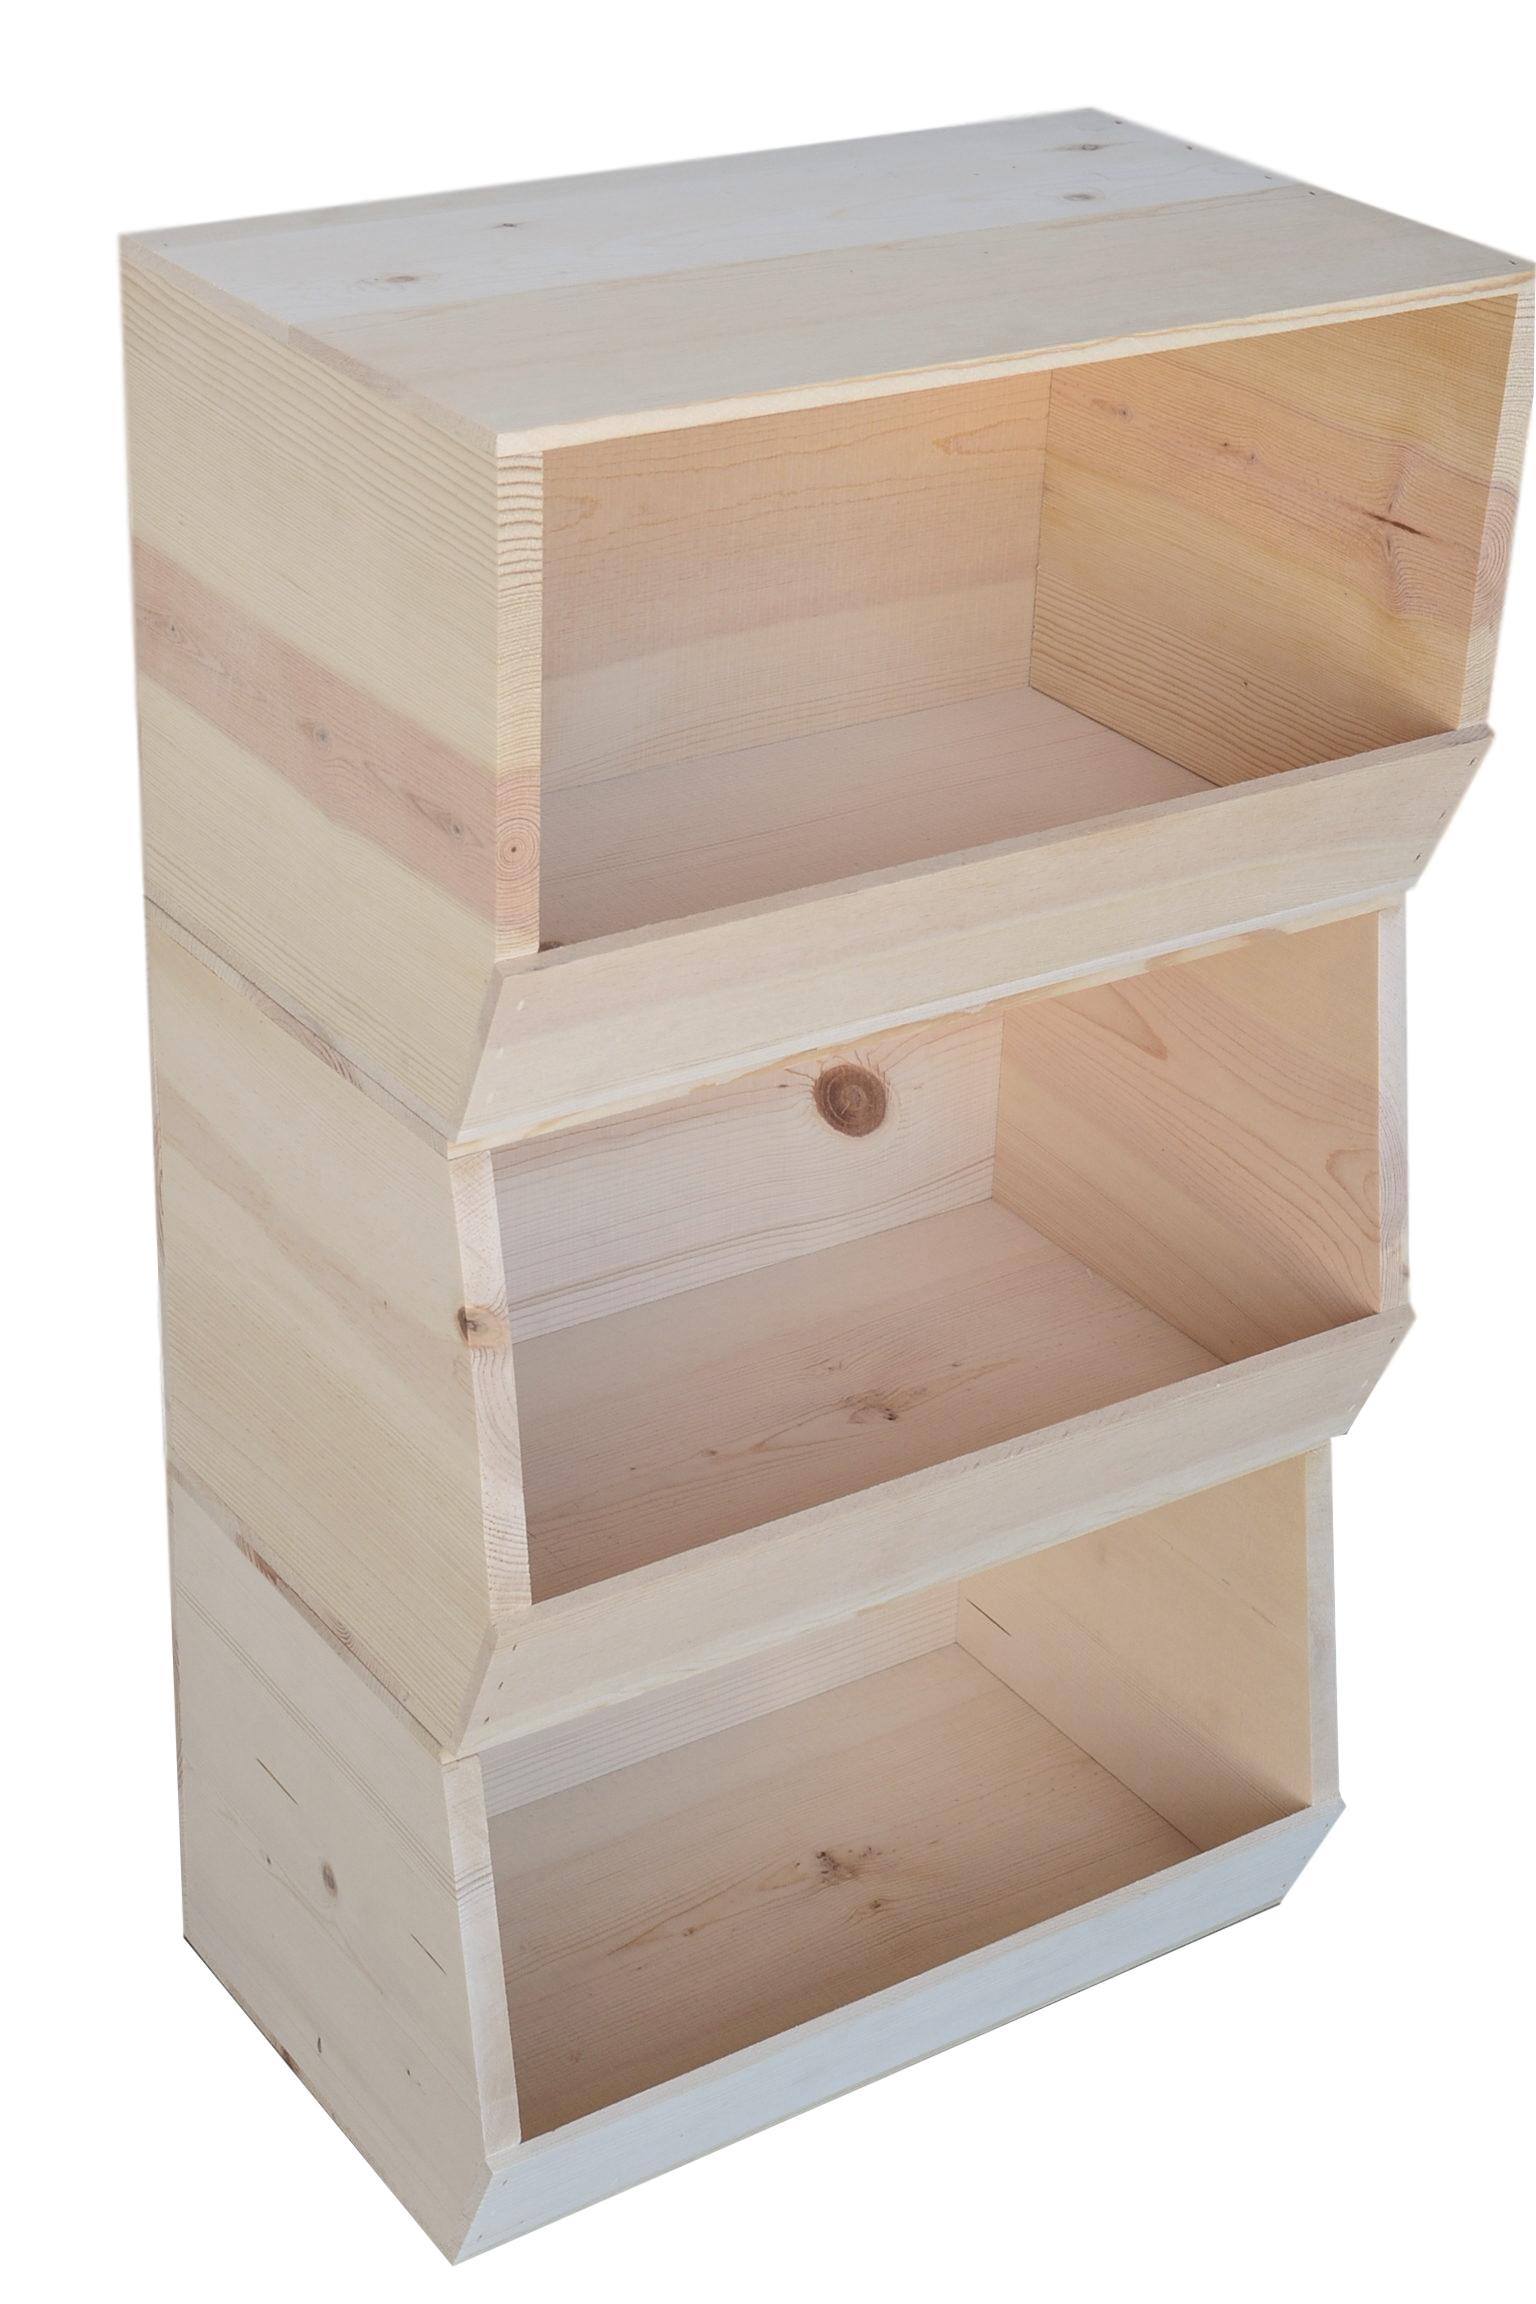 Wooden Stackable Storage Bin Poole, Wooden Stacking Crates For Storage